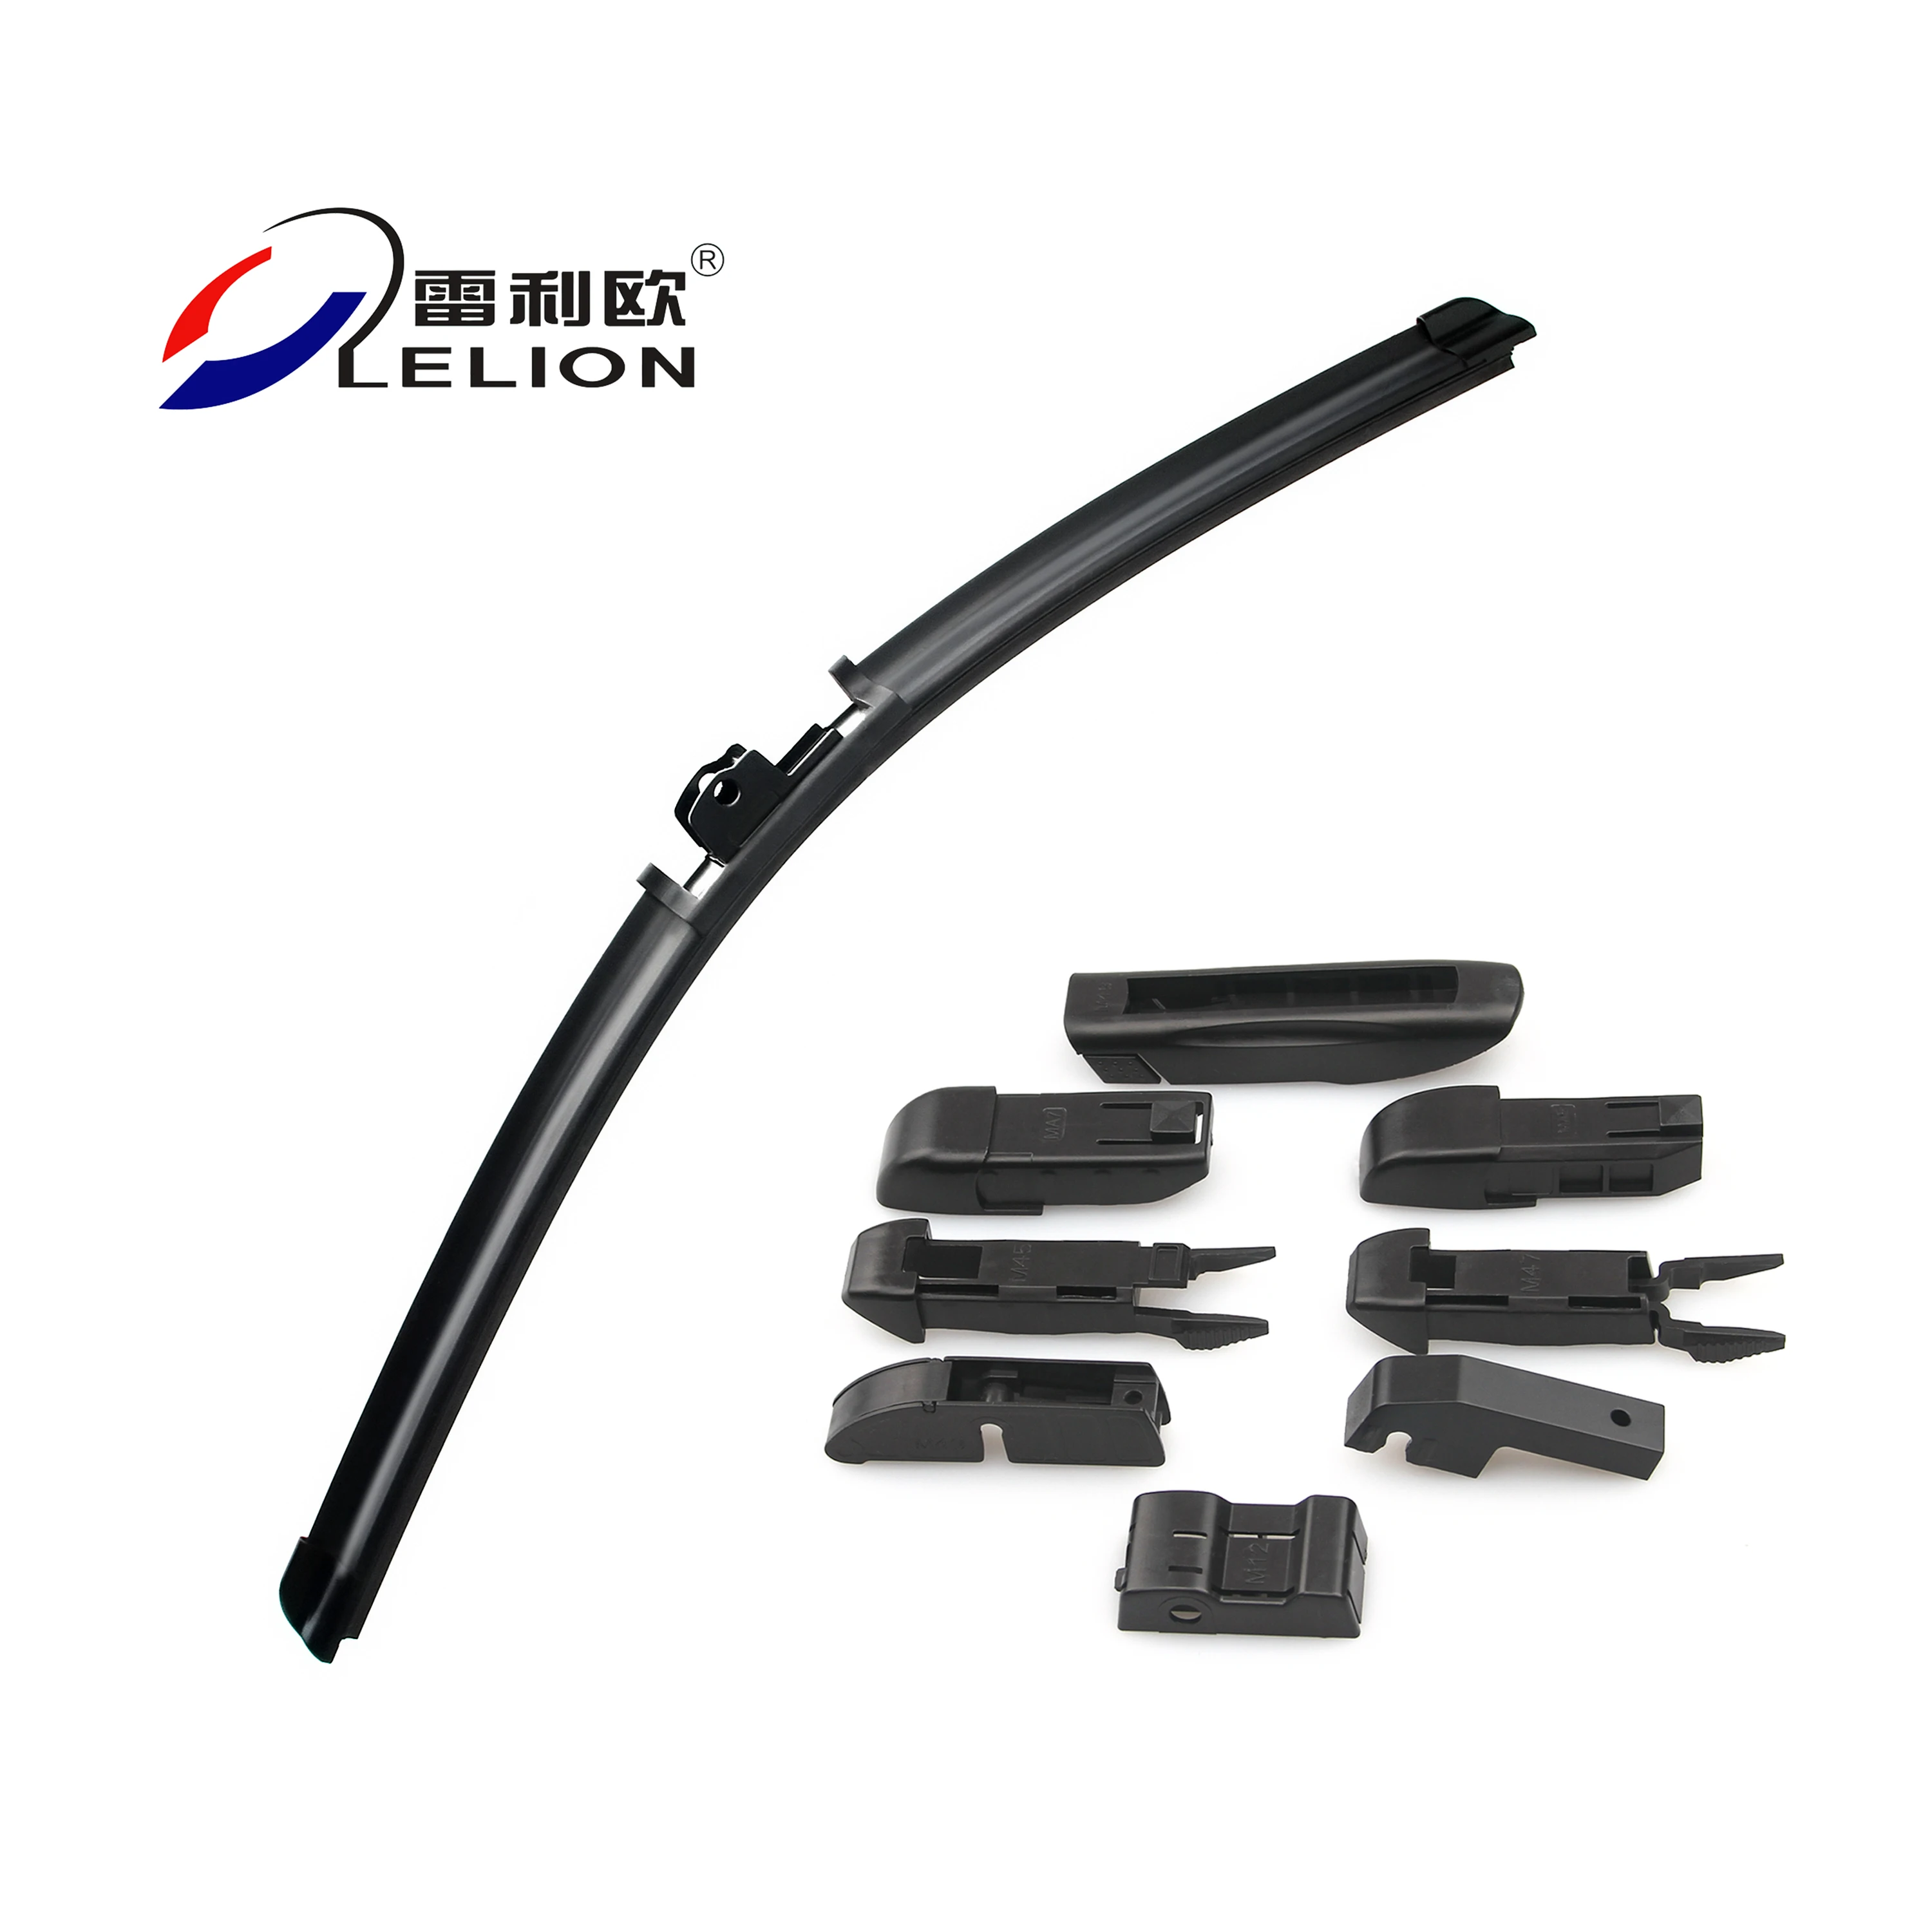 LELION High Quality Windshield Clear Natural Soft Wiper Blades Multi function Replaceable 8 Adapter Windscreen Wiper Blade